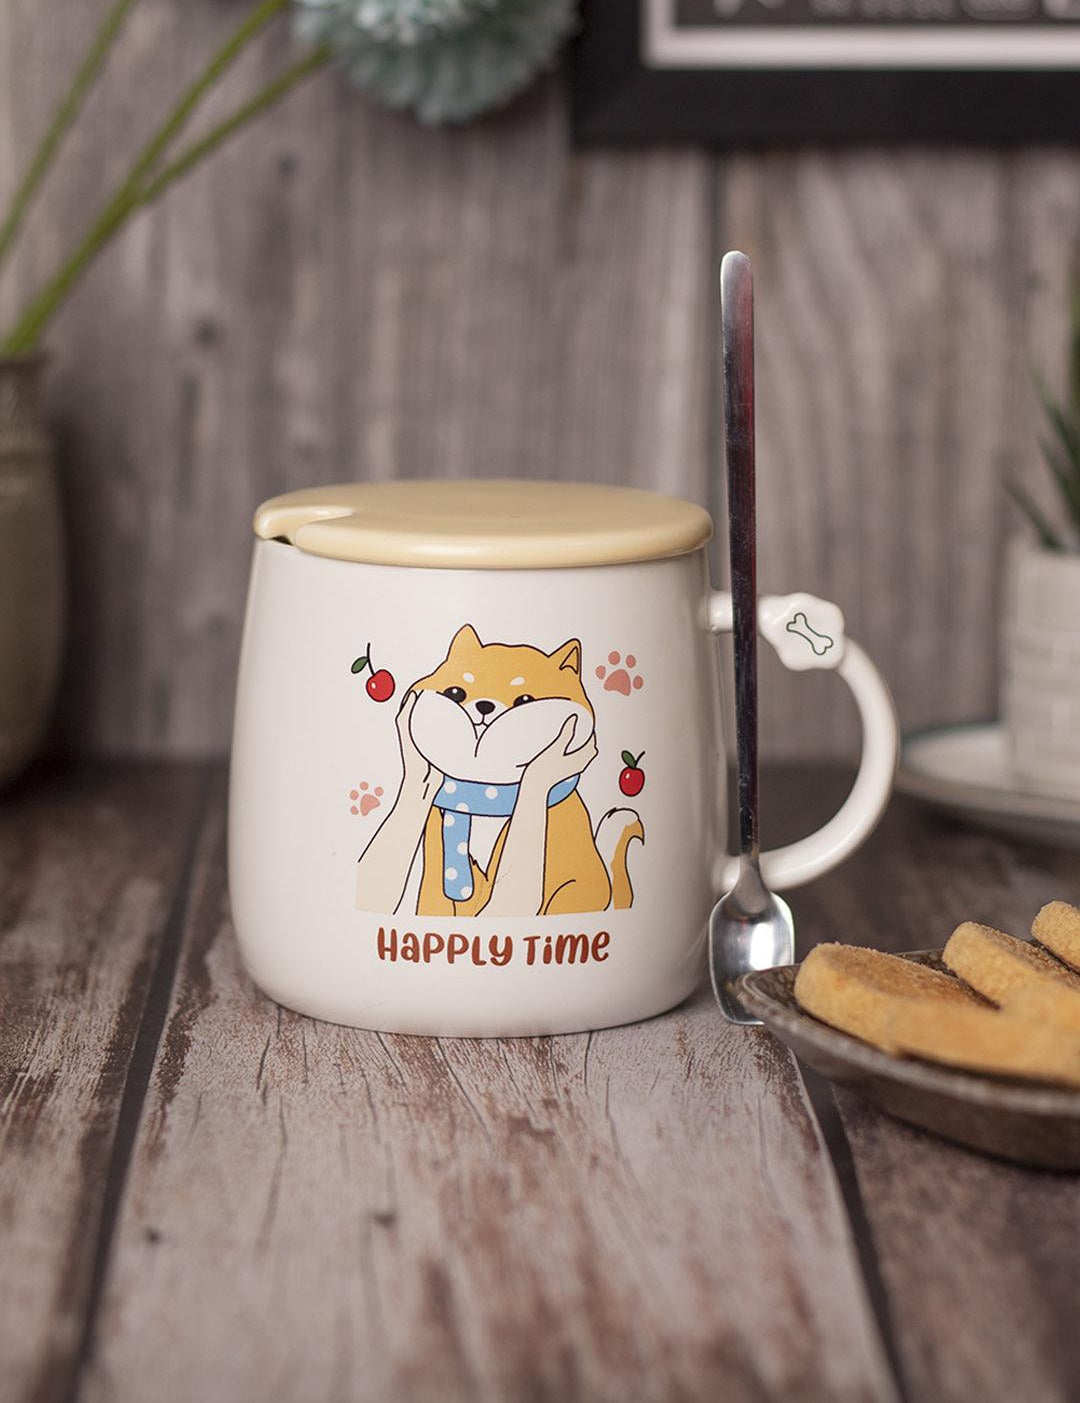 HAPPY TIME' Coffee Mug With Lid - White, Cat, 420 Ml - MARKET 99